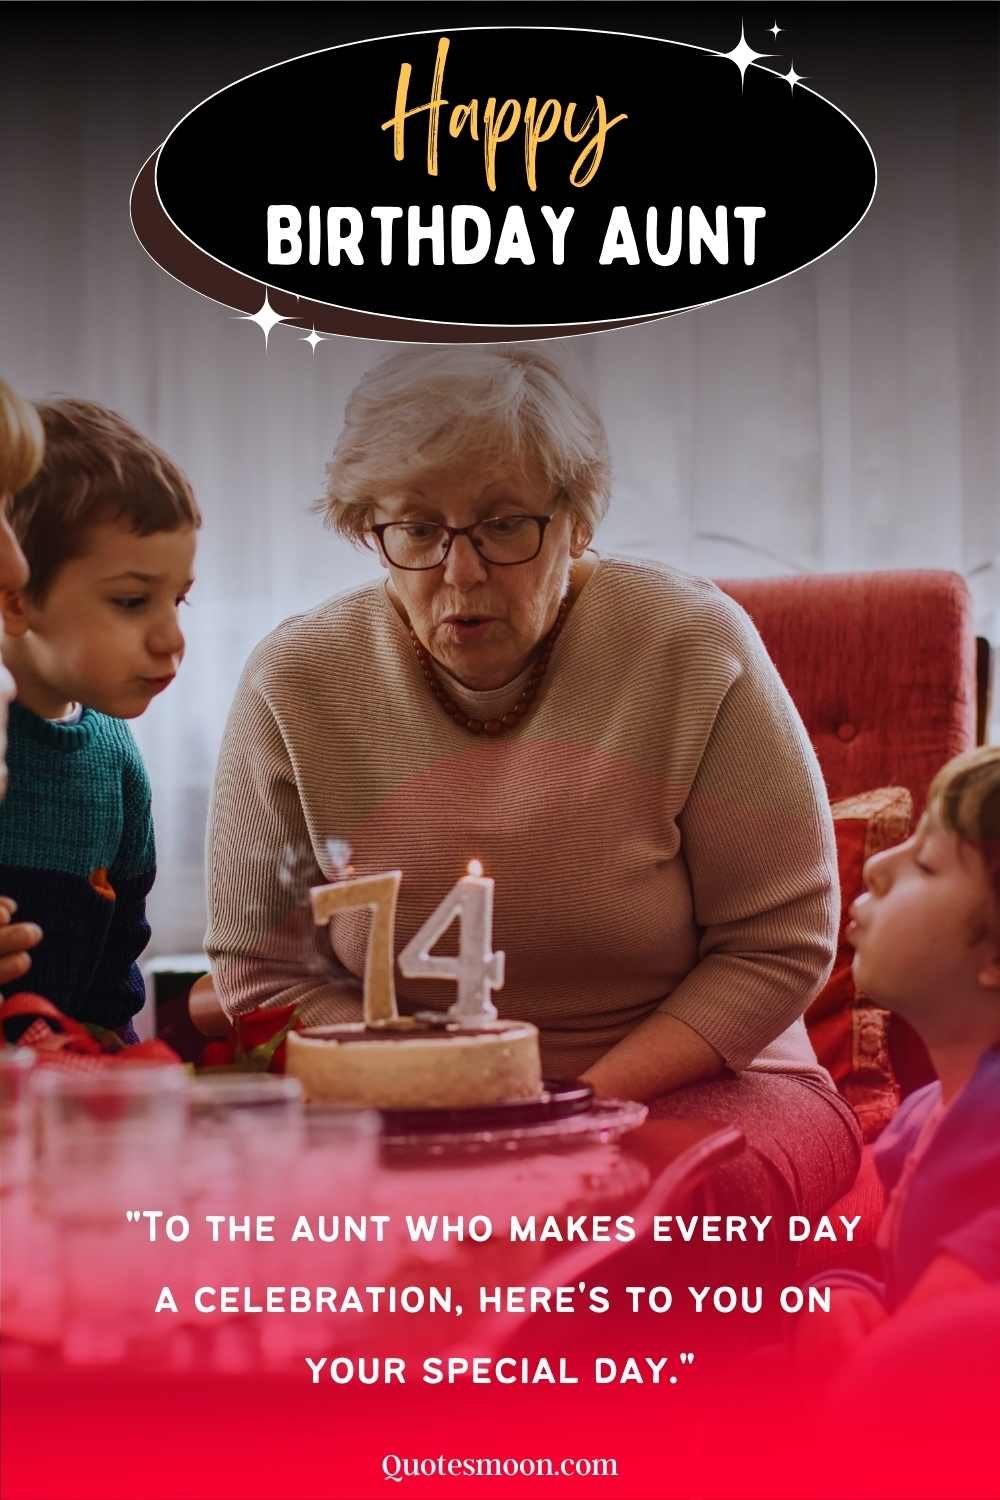 Funny Birthday Wishes For Aunty with image